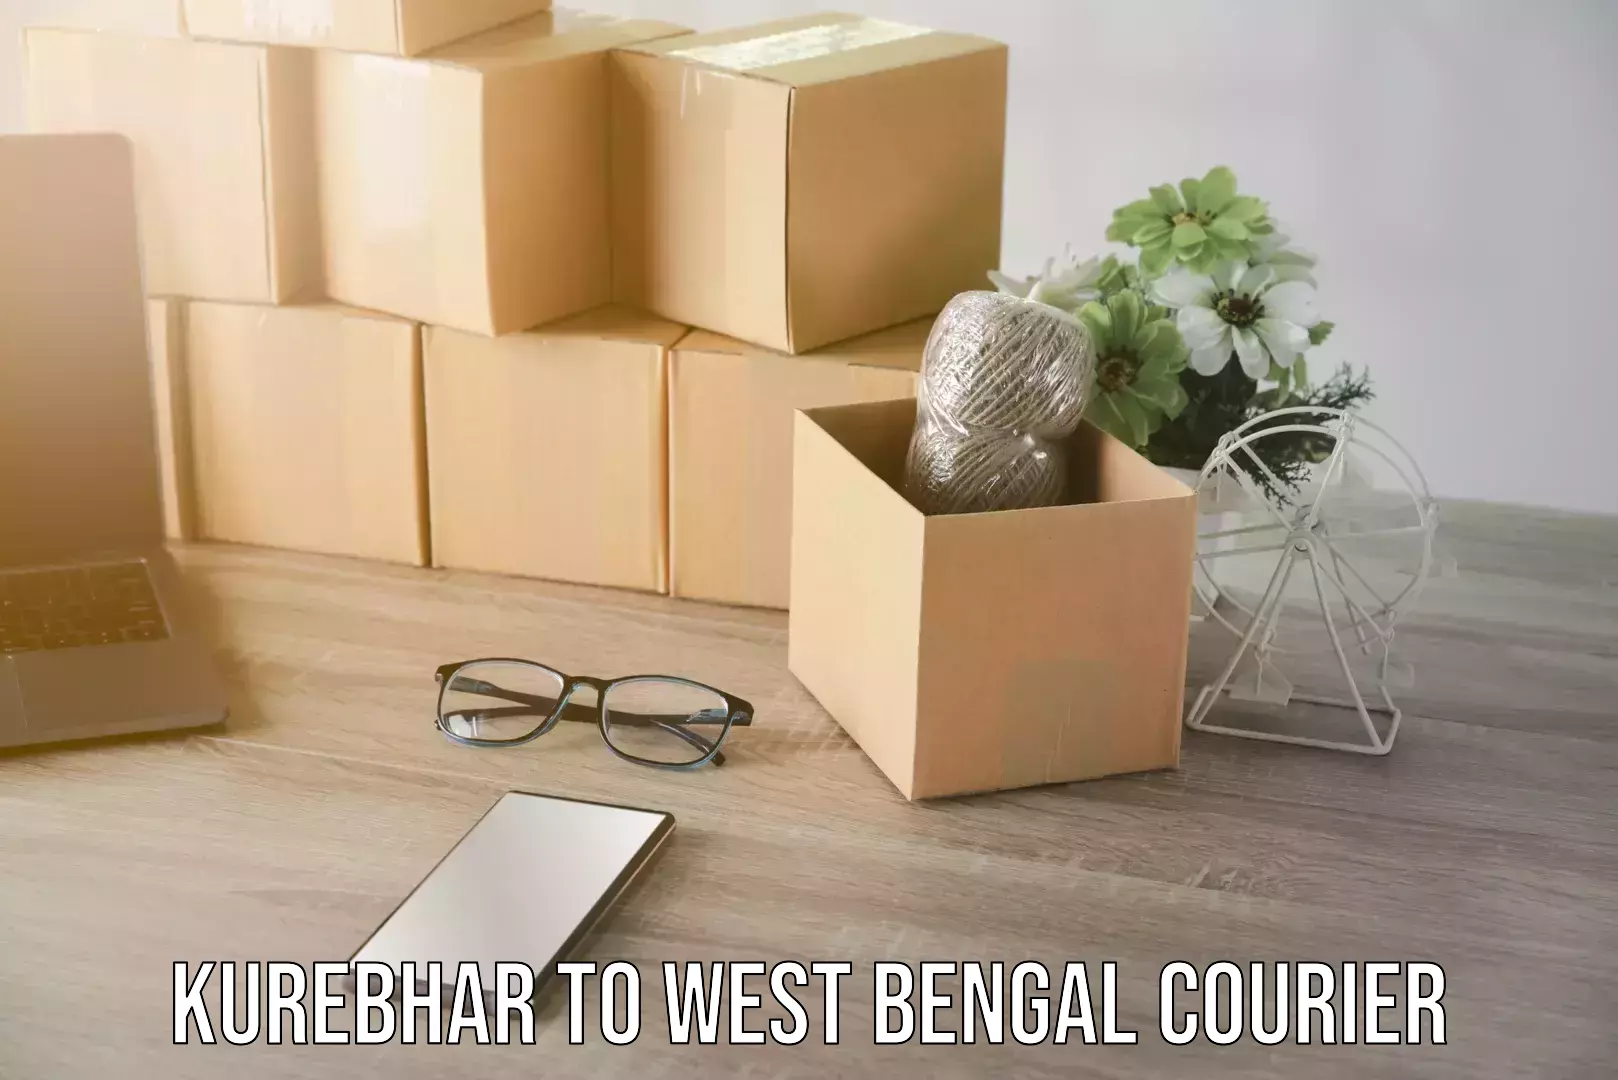 Quality moving services Kurebhar to West Bengal